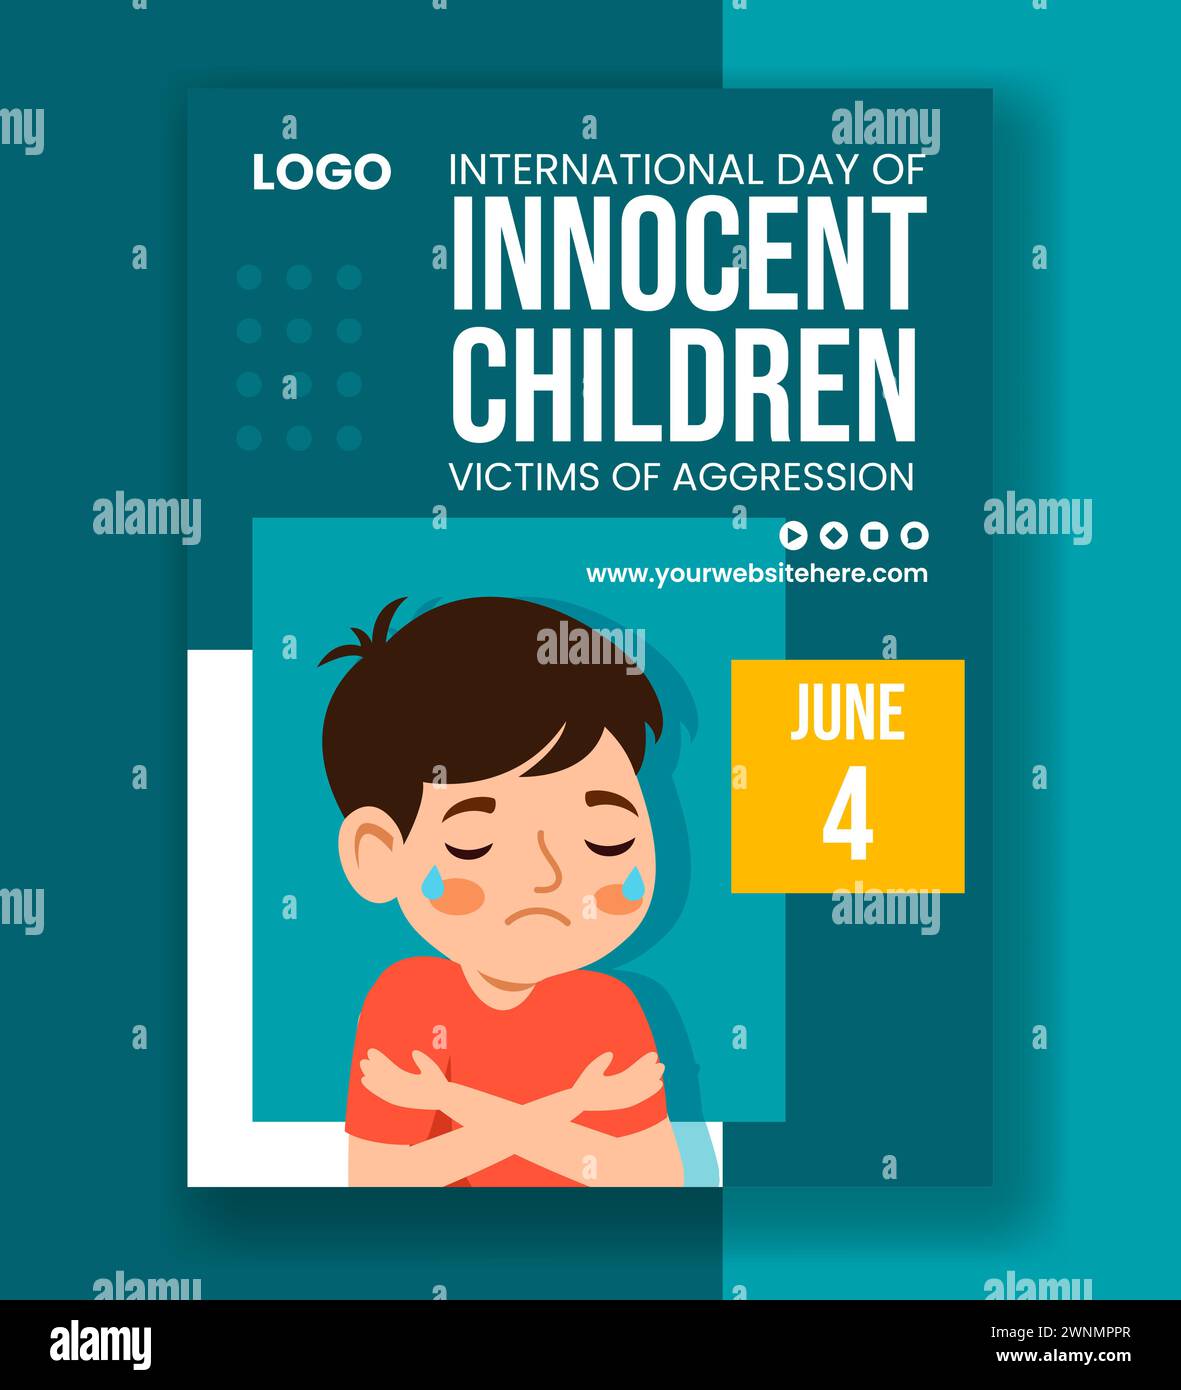 Innocent Children Victims of Aggression Vertical Poster Hand Drawn Templates Background Illustration Stock Vector